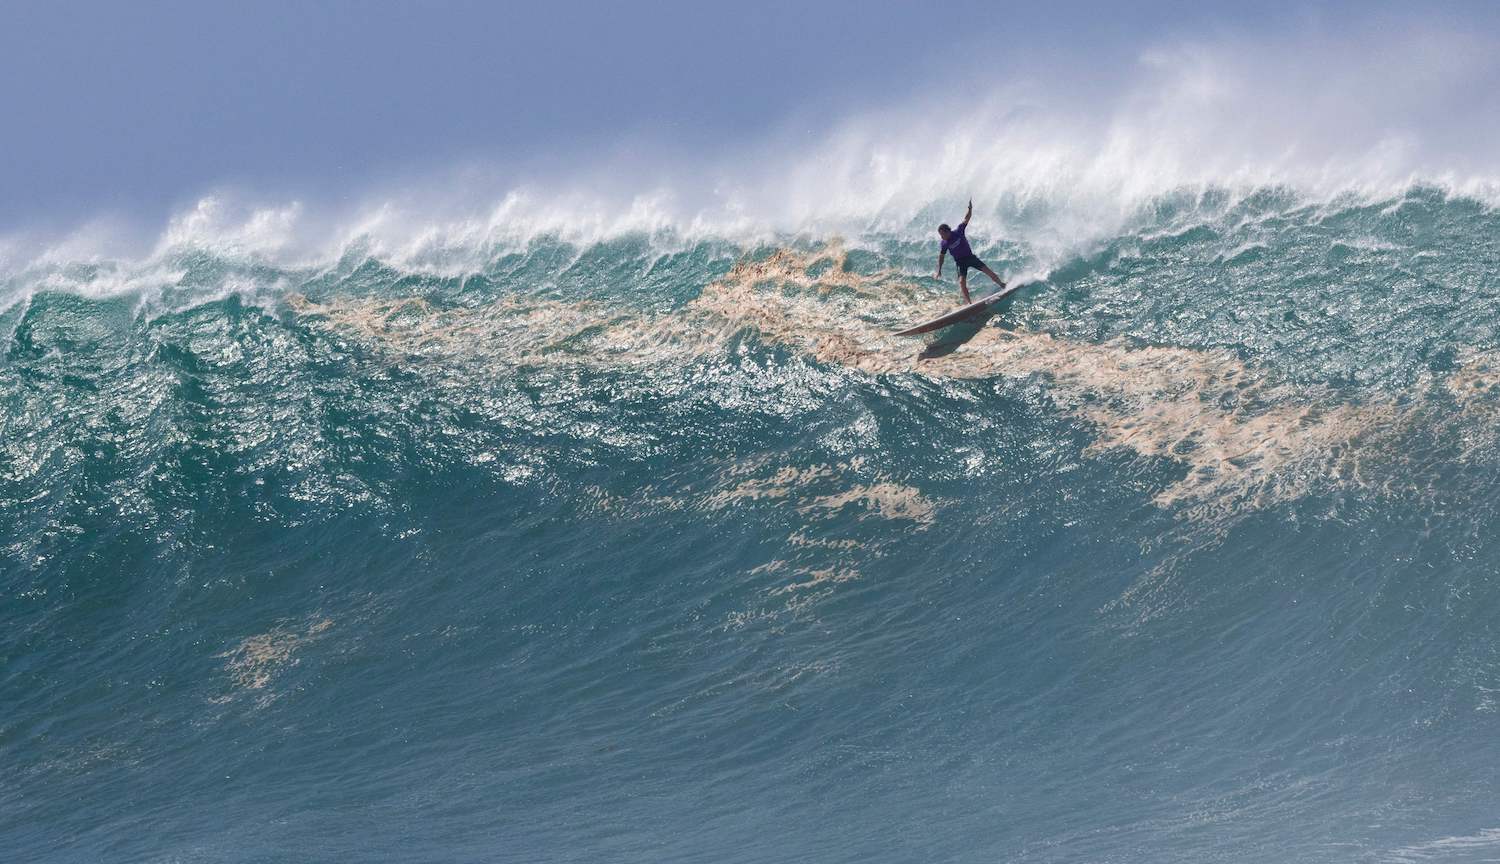 Hawaiian surfer Mark Healy rides a wave during The Eddie Aikau Big Wave Invitational surfing contest on January 22, 2023, at Waimea Bay on the North Shore of Oahu in Hawaii. - RESTRICTED TO EDITORIAL USE (Photo by Brian Bielmann / AFP) / RESTRICTED TO EDITORIAL USE (Photo by BRIAN BIELMANN/AFP via Getty Images)